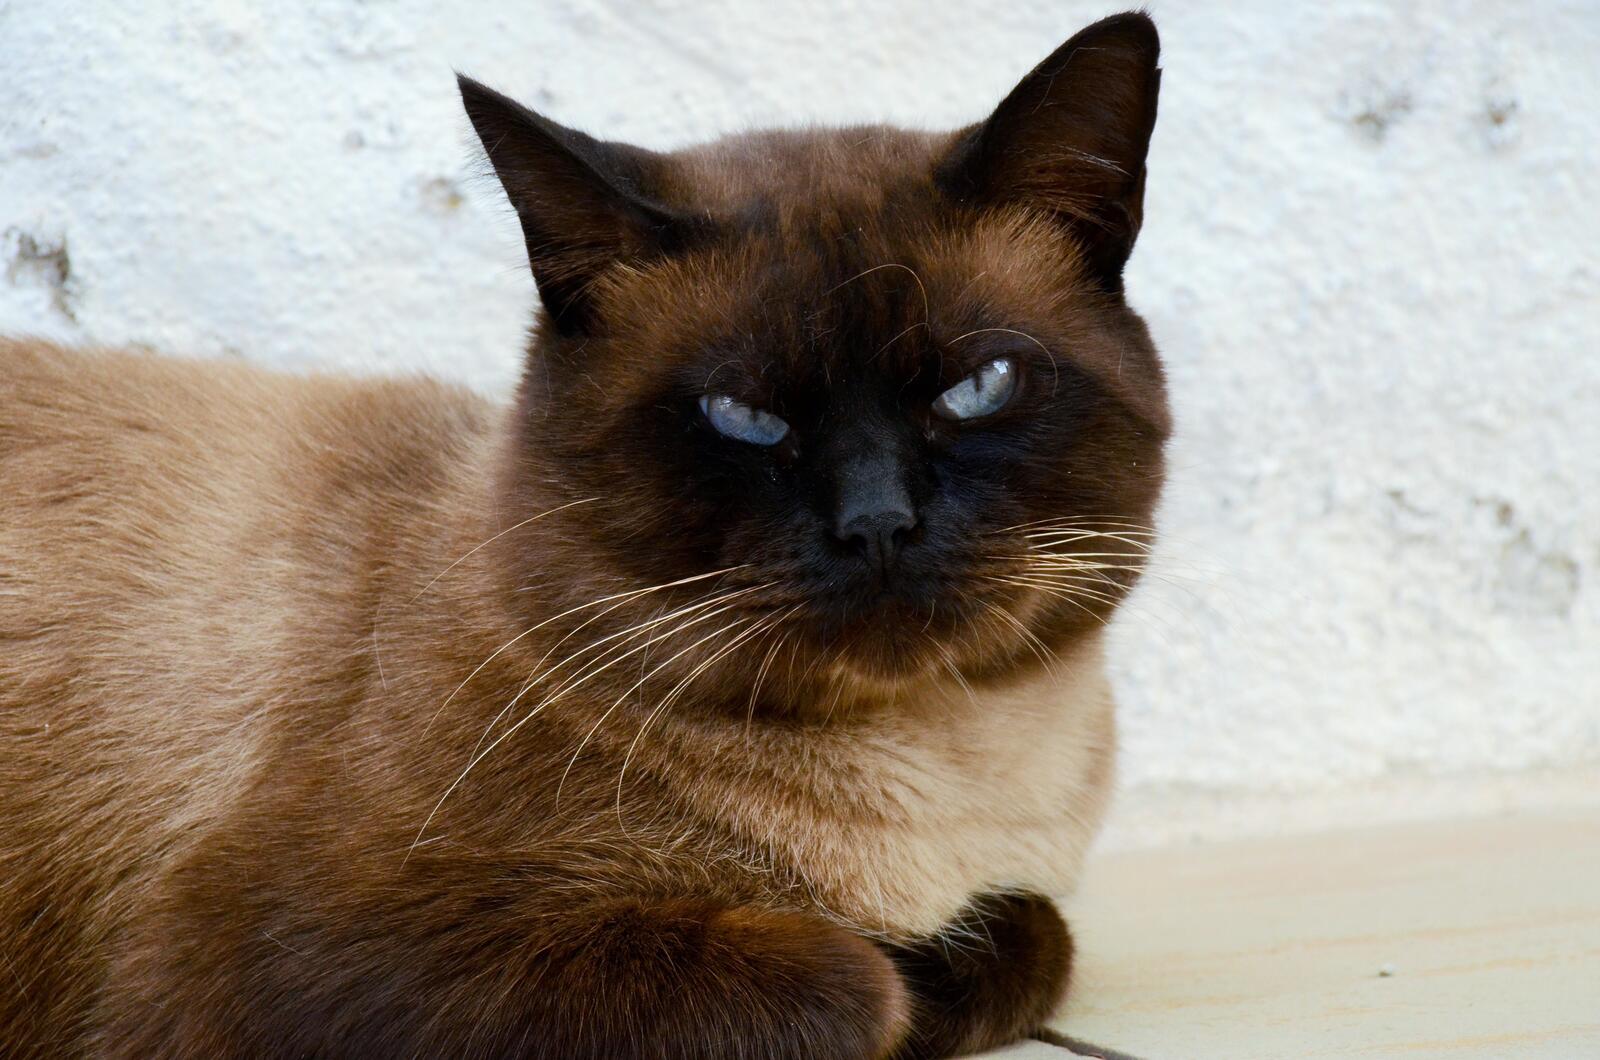 Wallpapers wallpaper siamese cat angry expression cats on the desktop